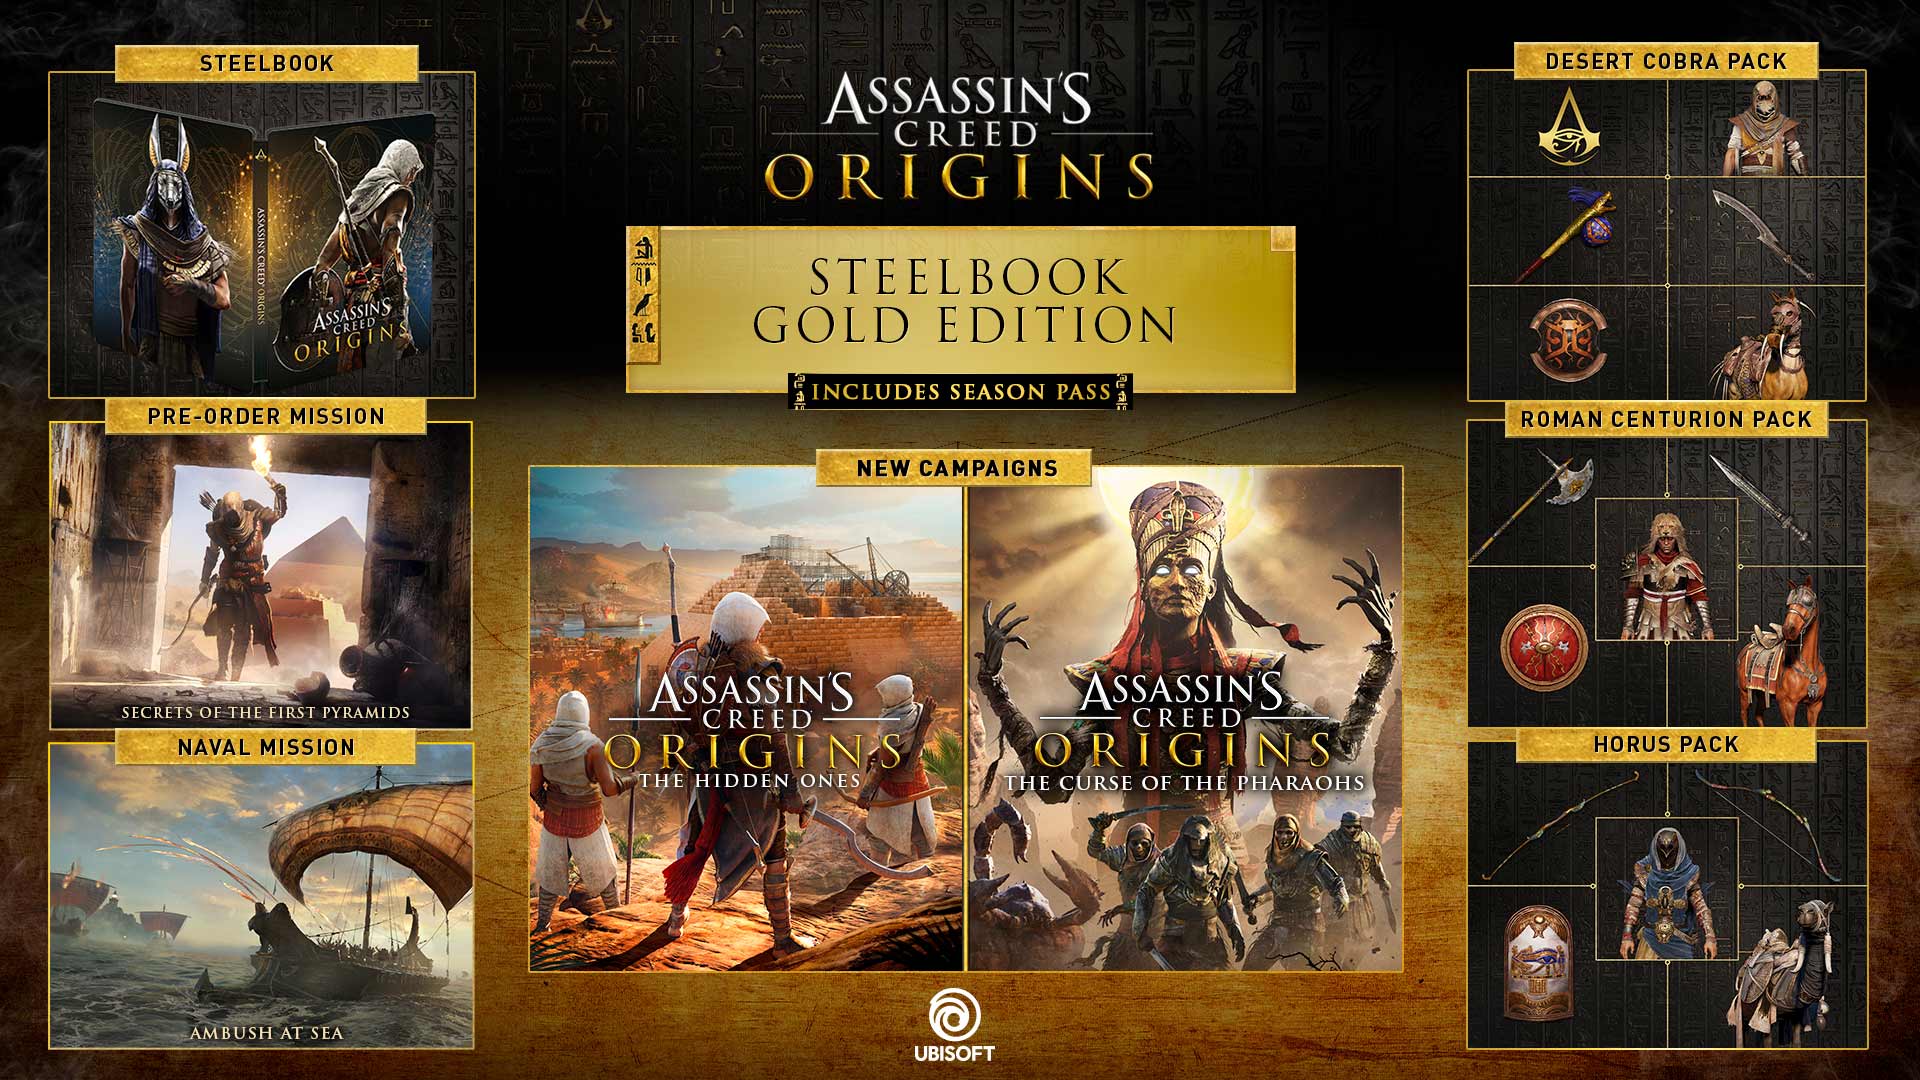 Buy Assassin's Creed® Origins Steelbook Gold Edition for PS4 and Xbox One |  Ubisoft Official Store